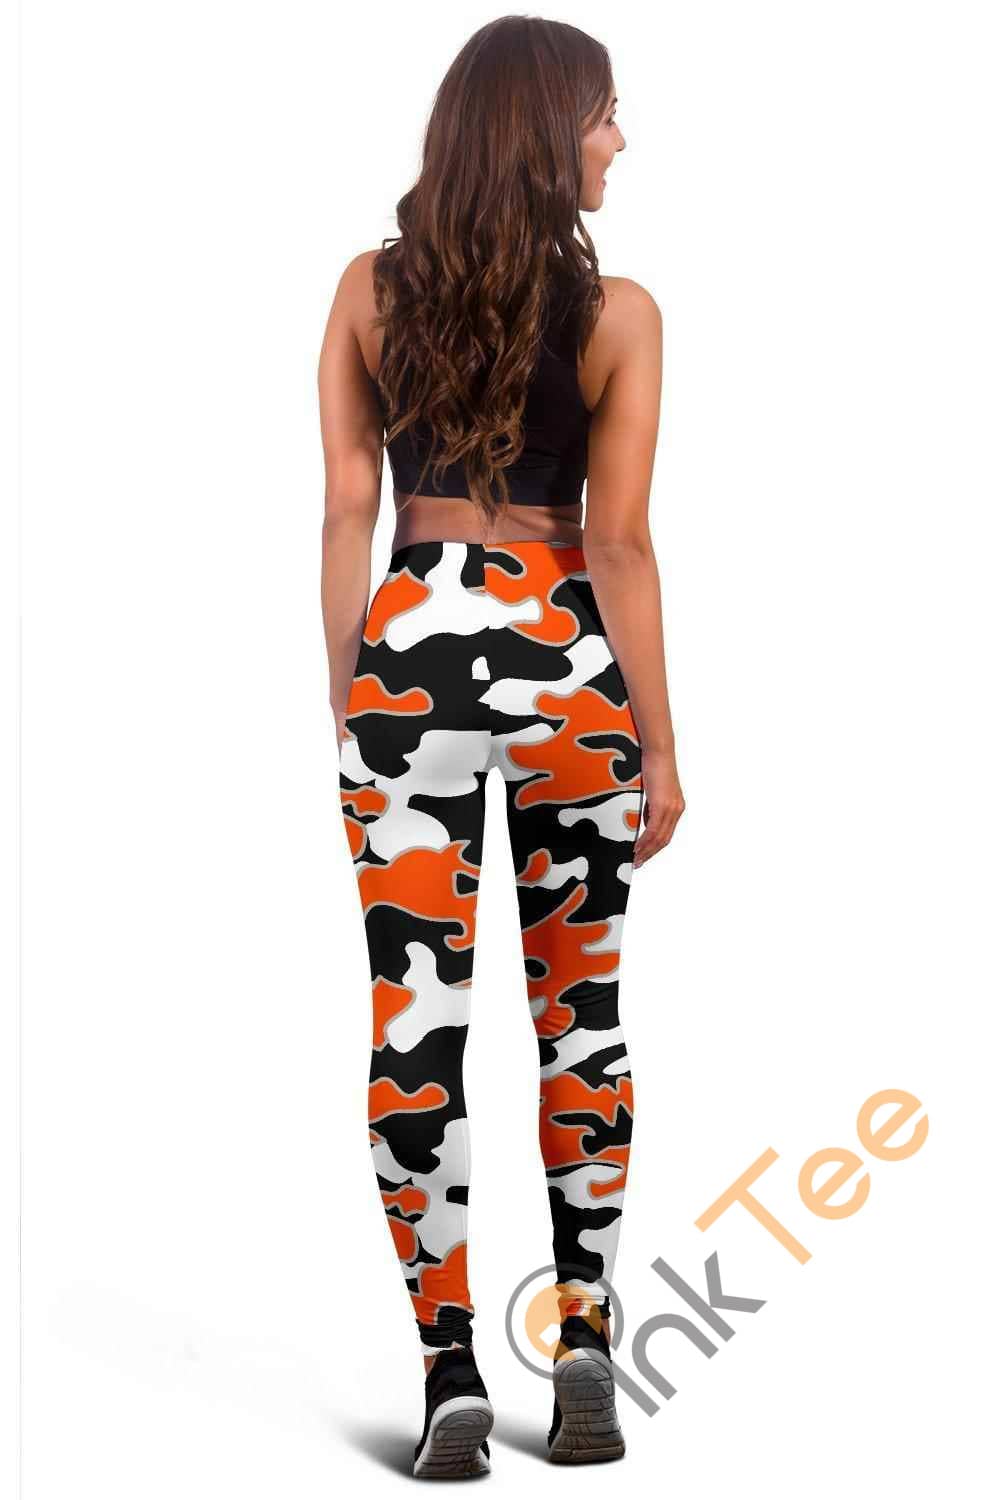 Inktee Store - Baltimore Orioles Inspired Tru Camo 3D All Over Print For Yoga Fitness Fashion Women'S Leggings Image